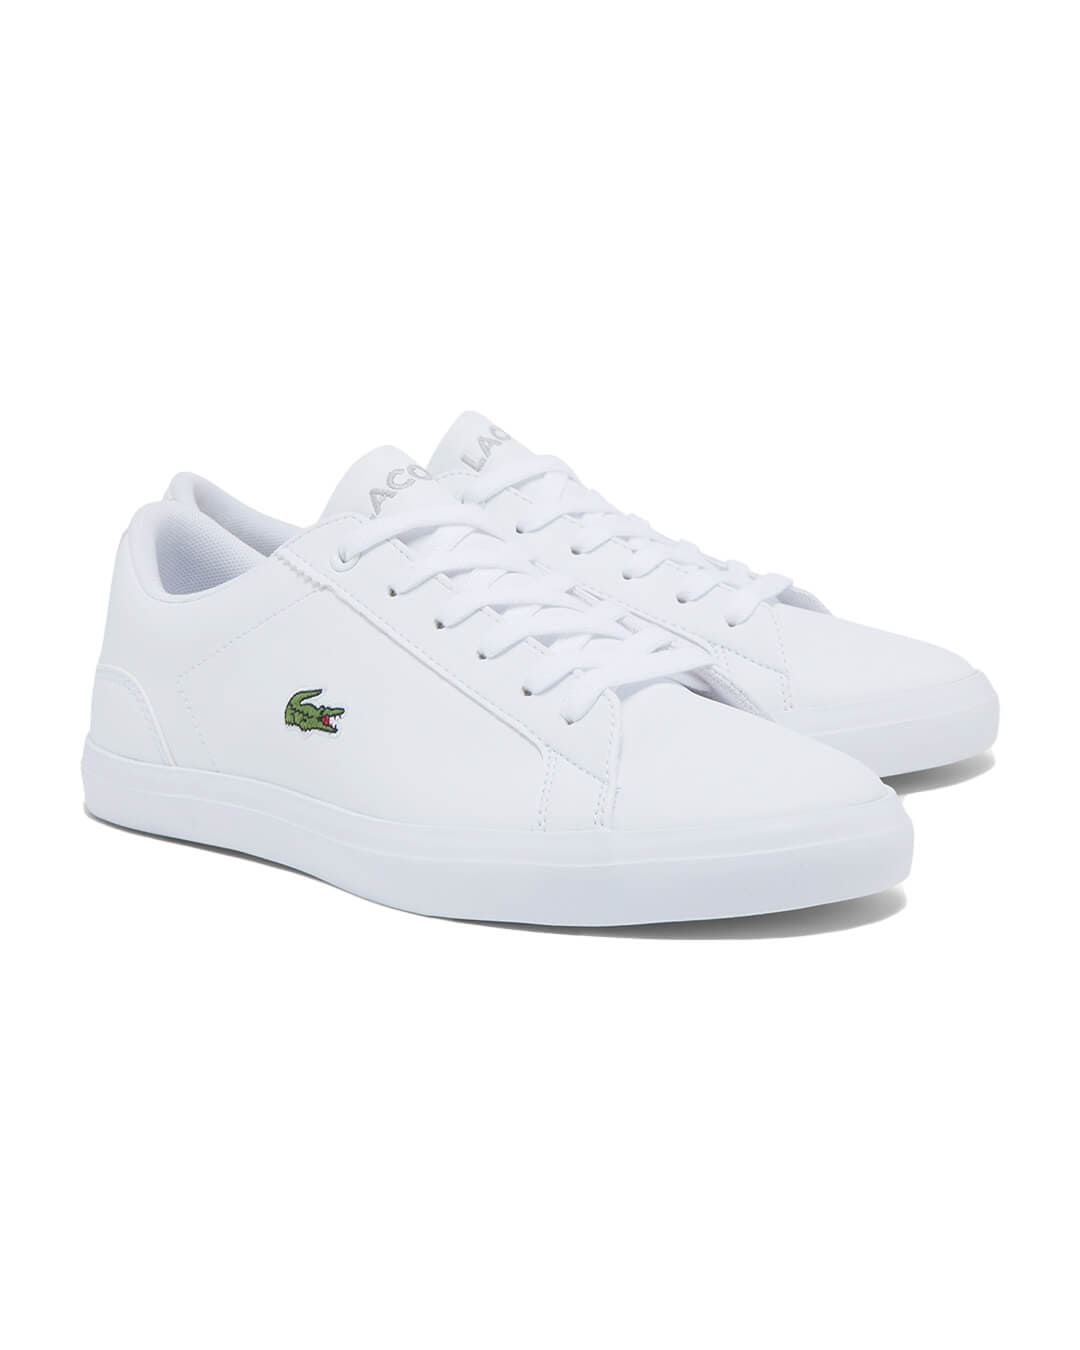 Lacoste Shoes Lacoste Lerond Synthetic White Trainers